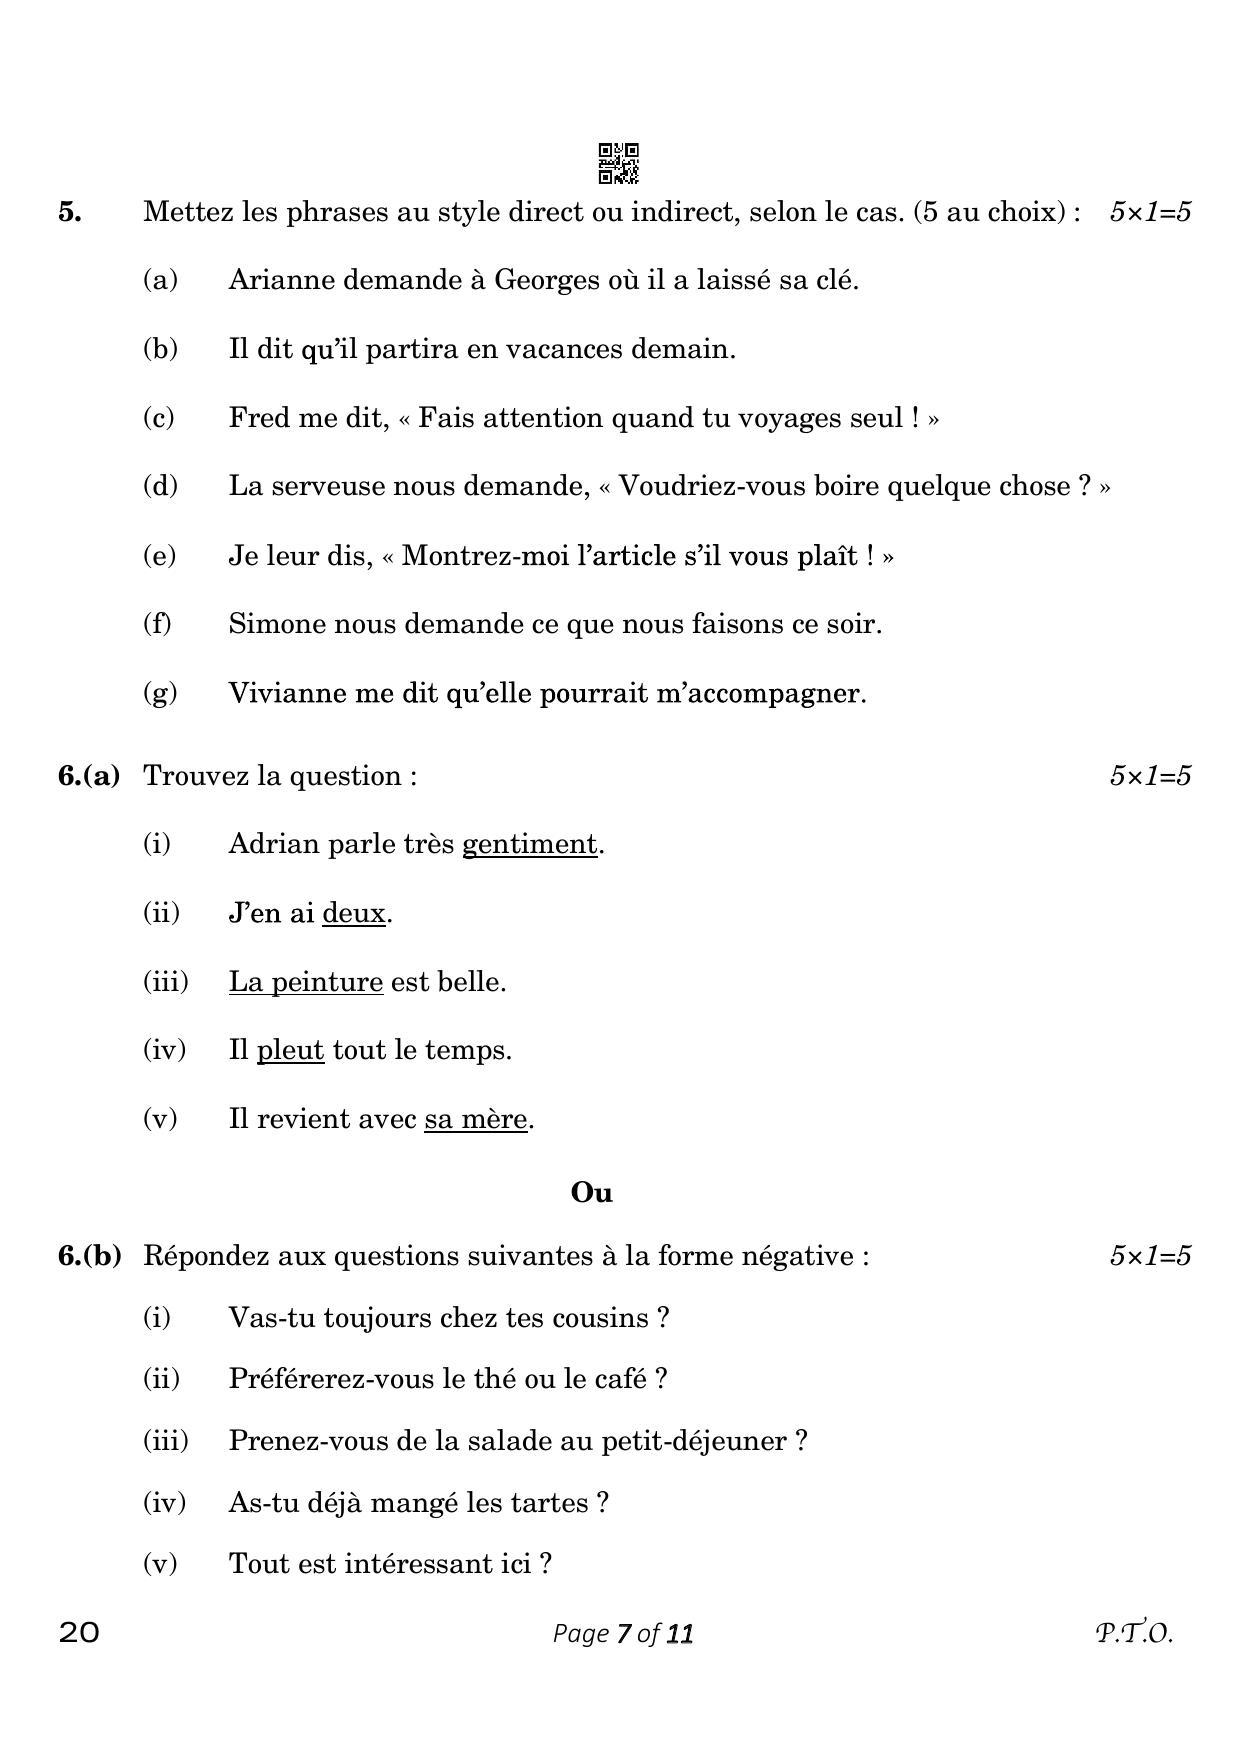 CBSE Class 10 French (Compartment) 2023 Question Paper - Page 7